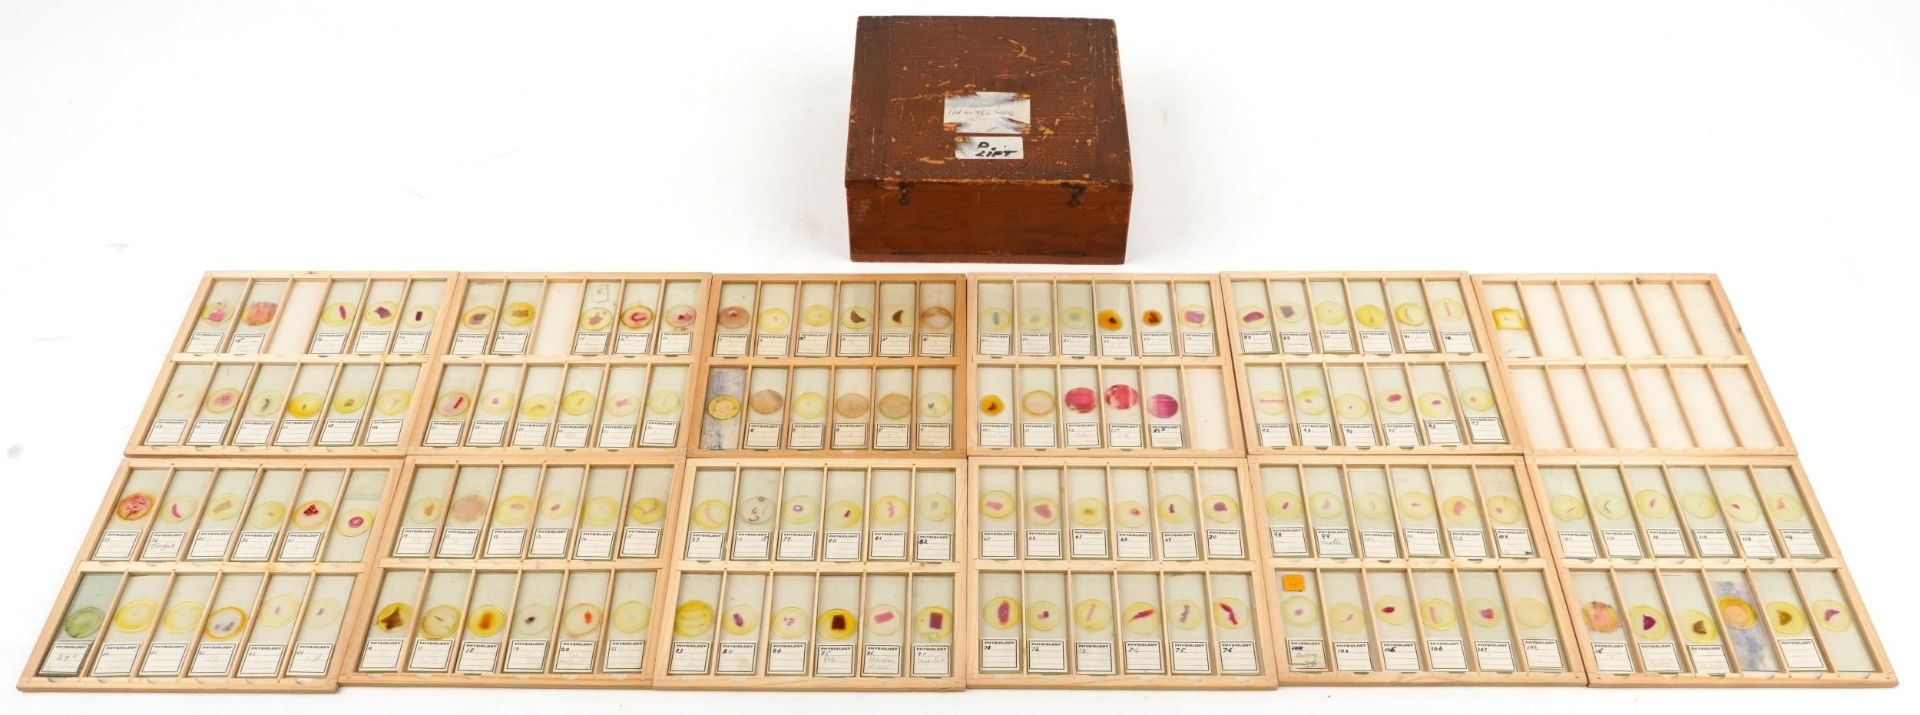 Collection of over one hundred scientific interest physiology microscopen prepared glass slides